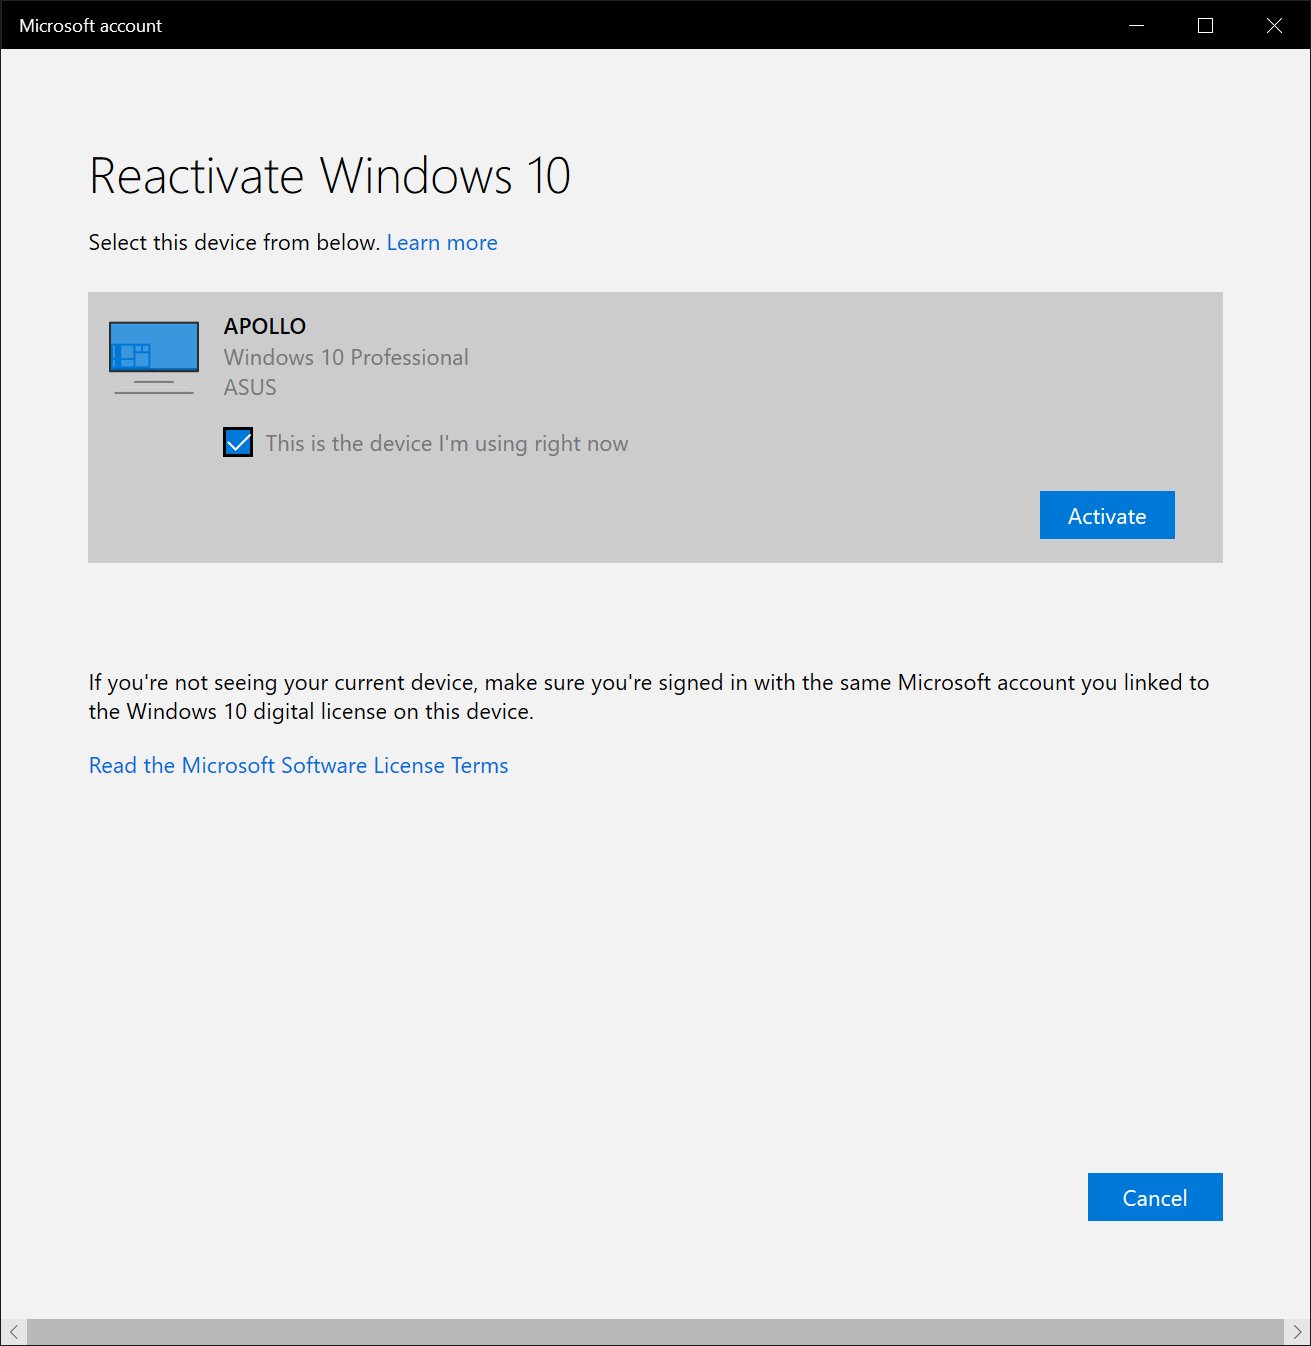 Windows 10 fails to activate after hardware change 43174c2e-68d9-4323-a36e-c6acb9116a25?upload=true.png